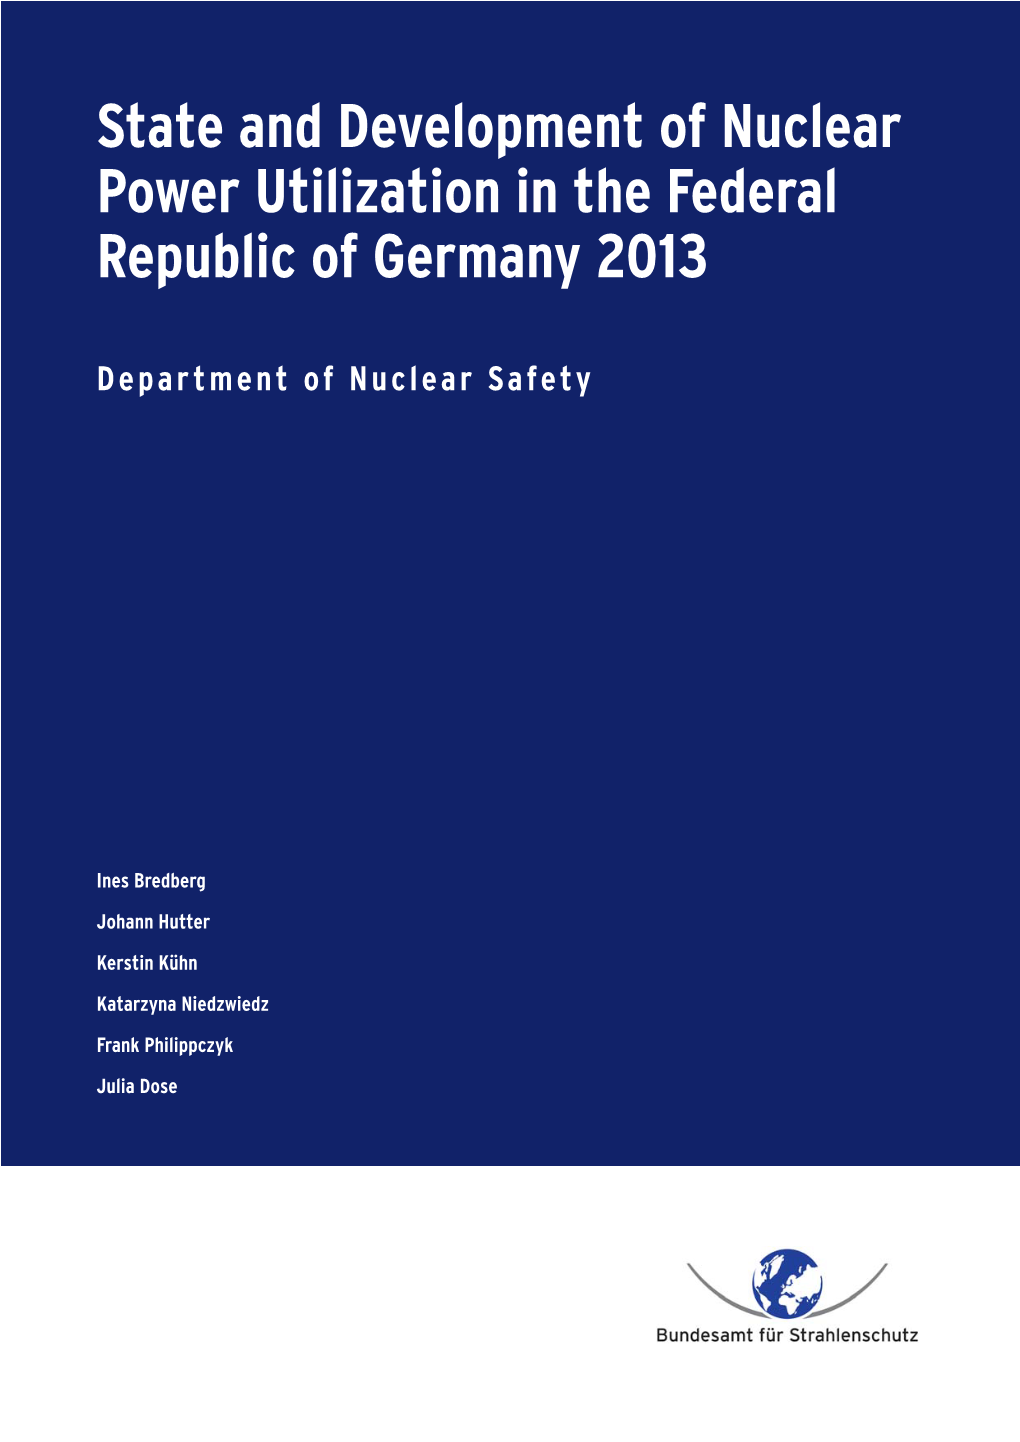 State and Development of Nuclear Power Utilization in Germany 2013